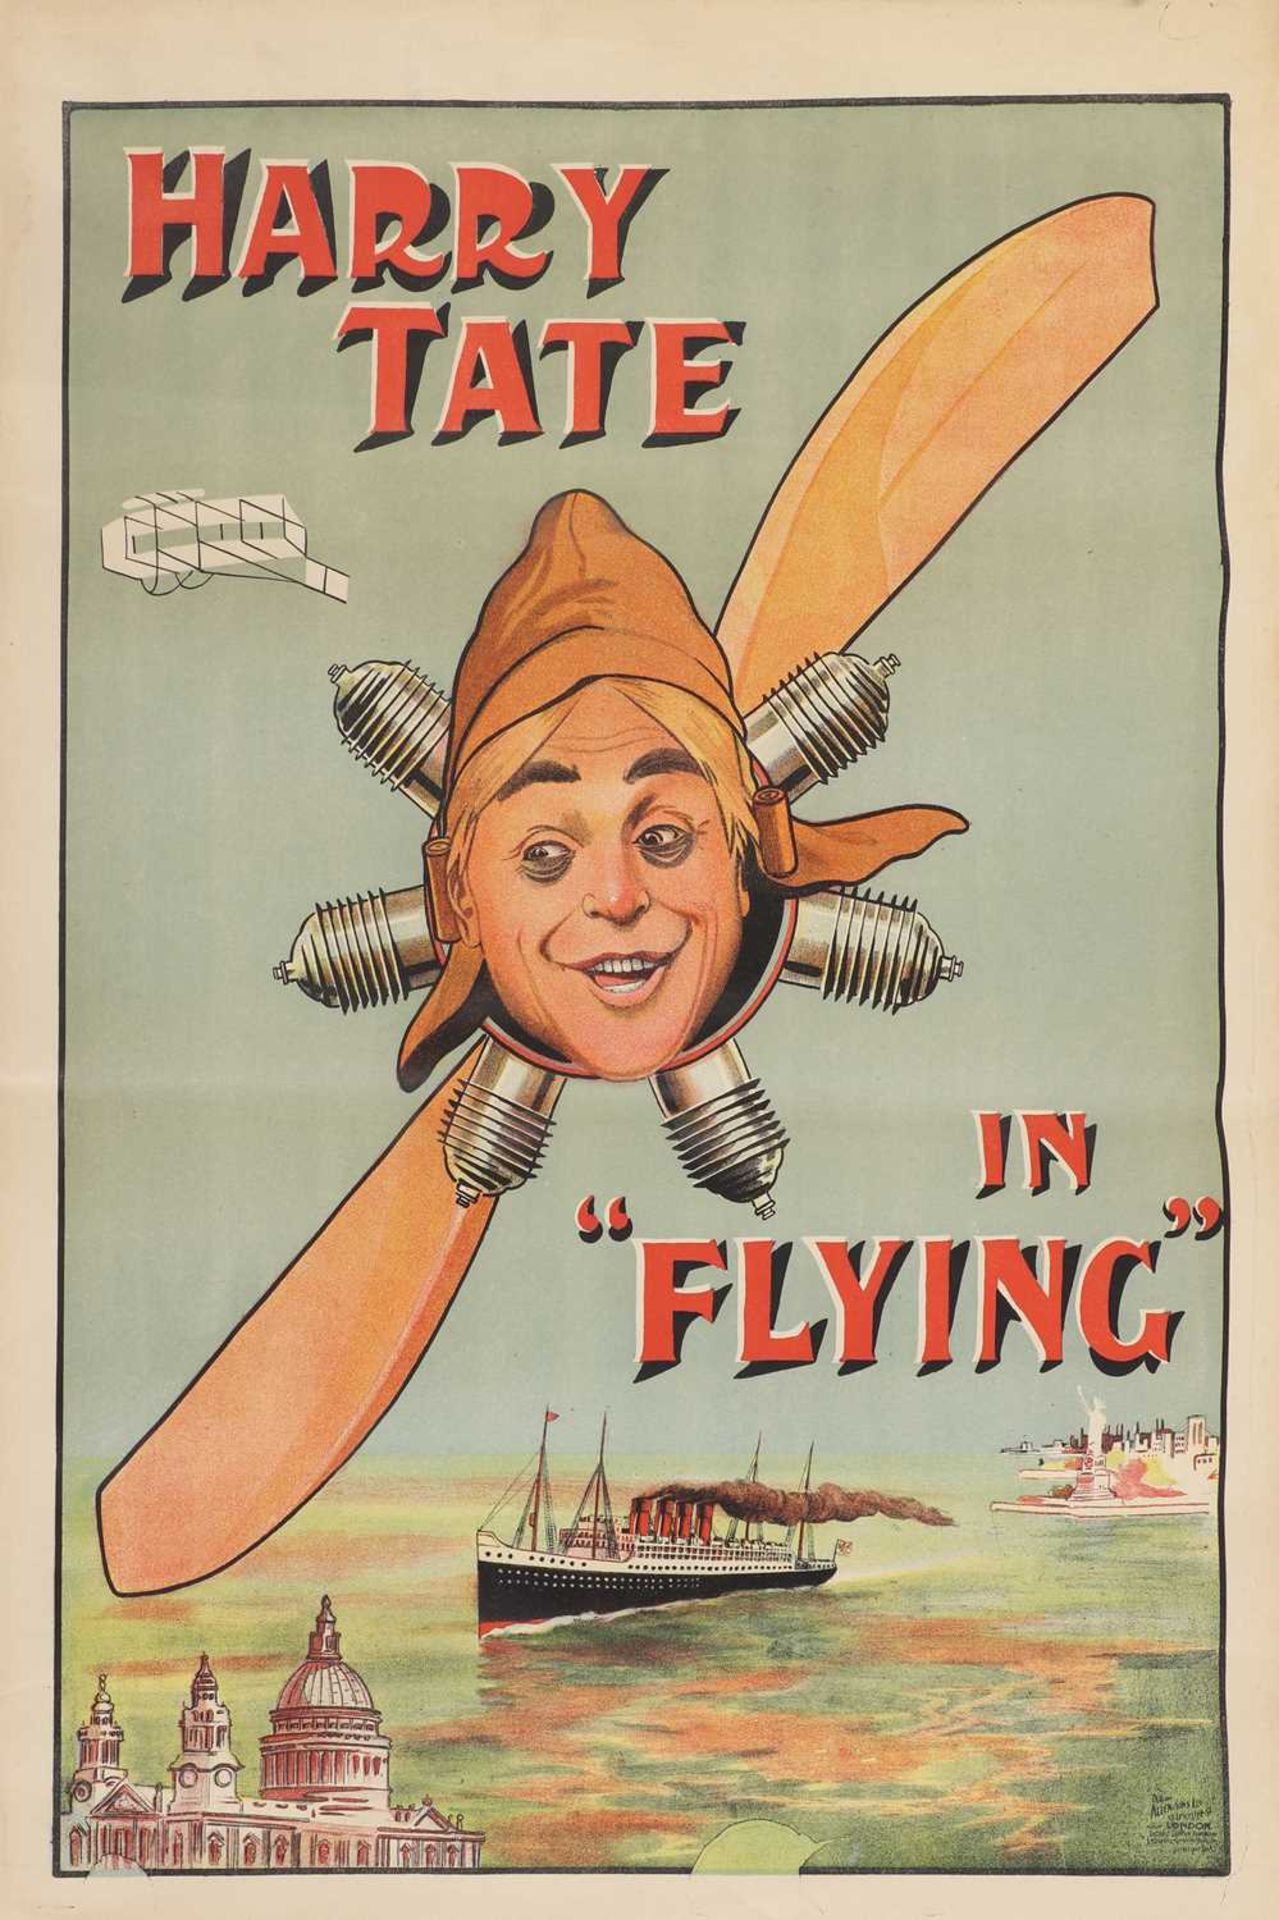 Harry Tate in 'Flying',